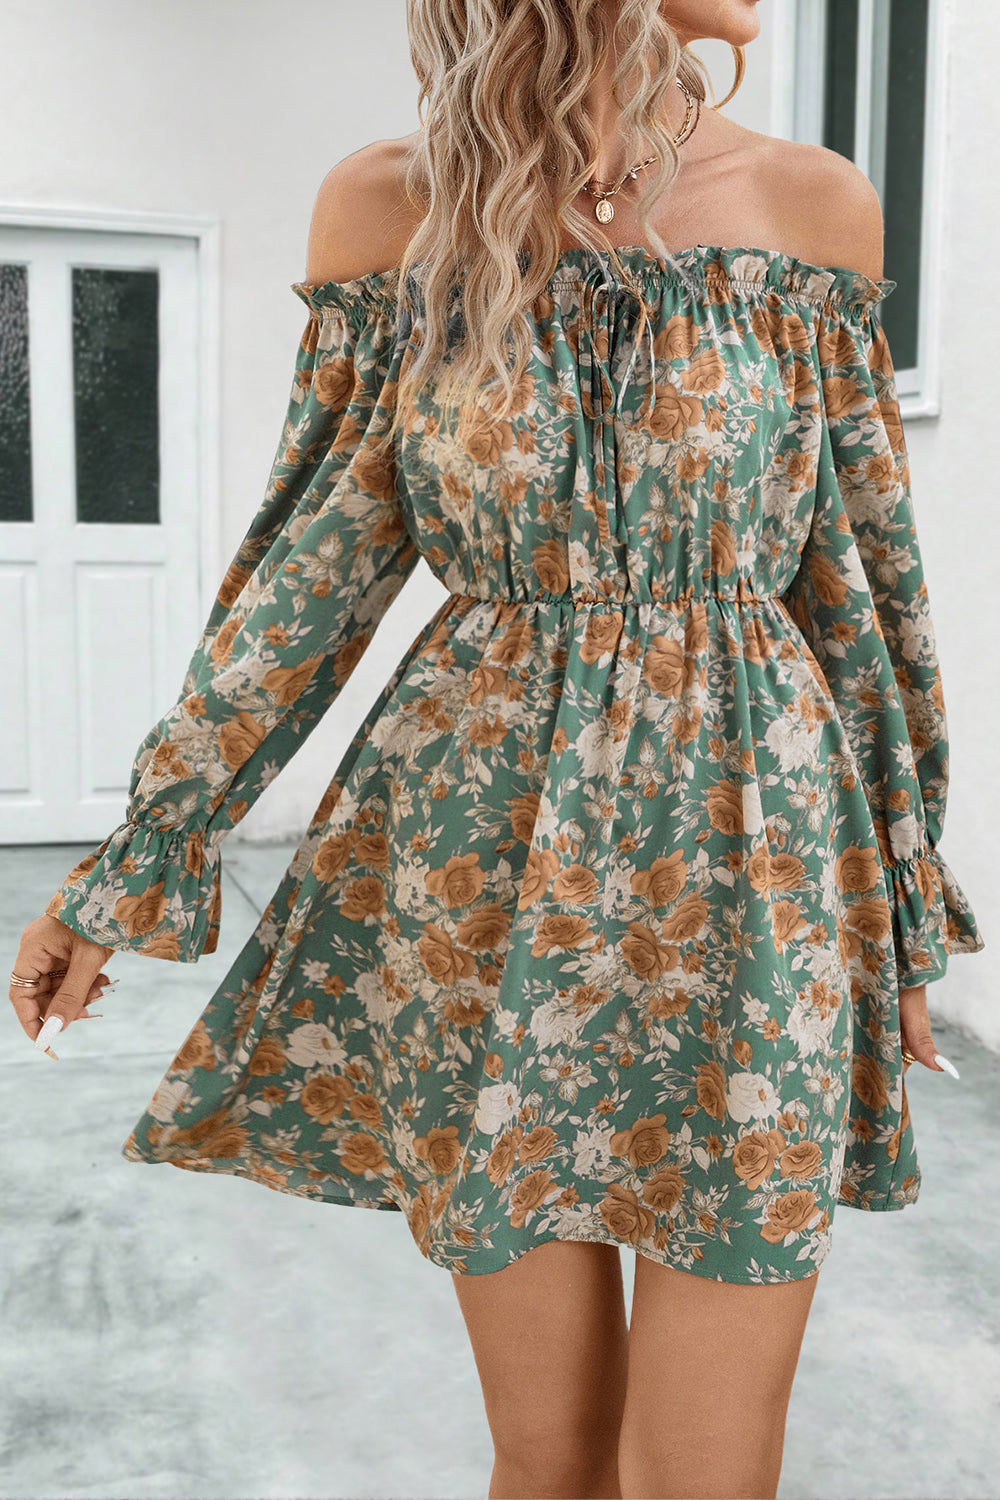 Summer Chic: Off-Shoulder Floral Dress for Beach Wedding Guests & Party Attendees